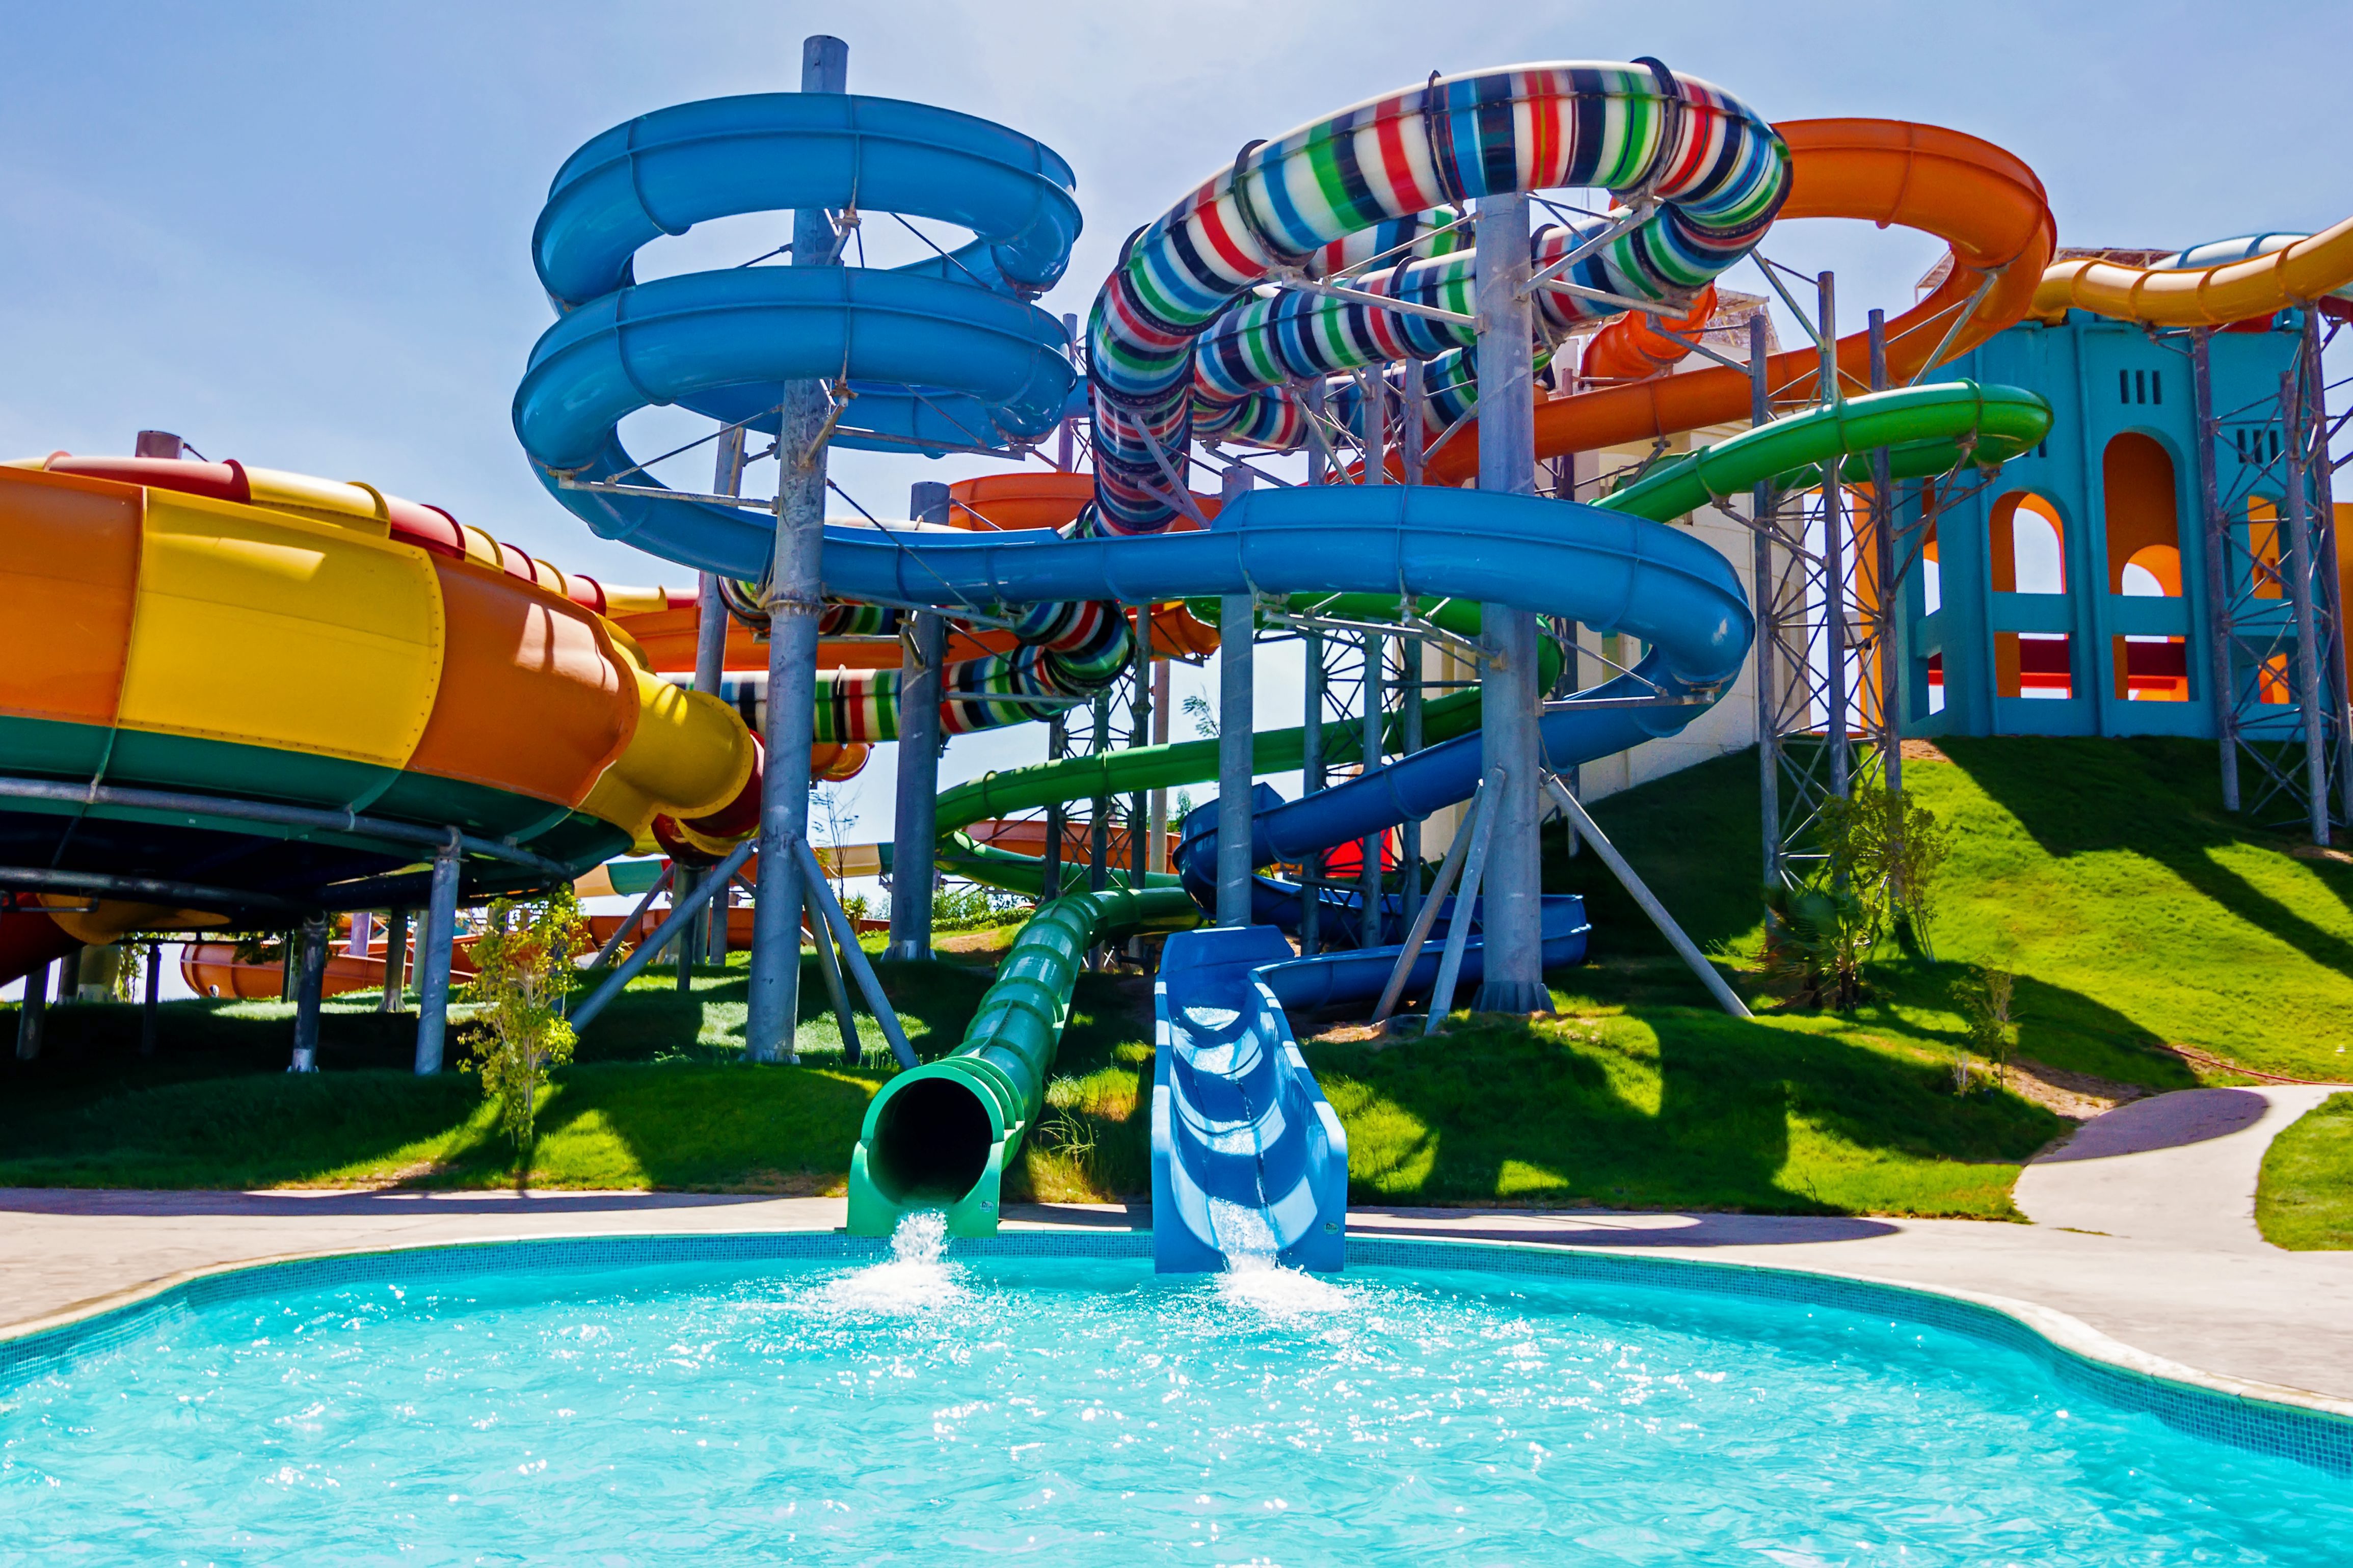 This waterpark in Turkey has 30 slides and a wave pool